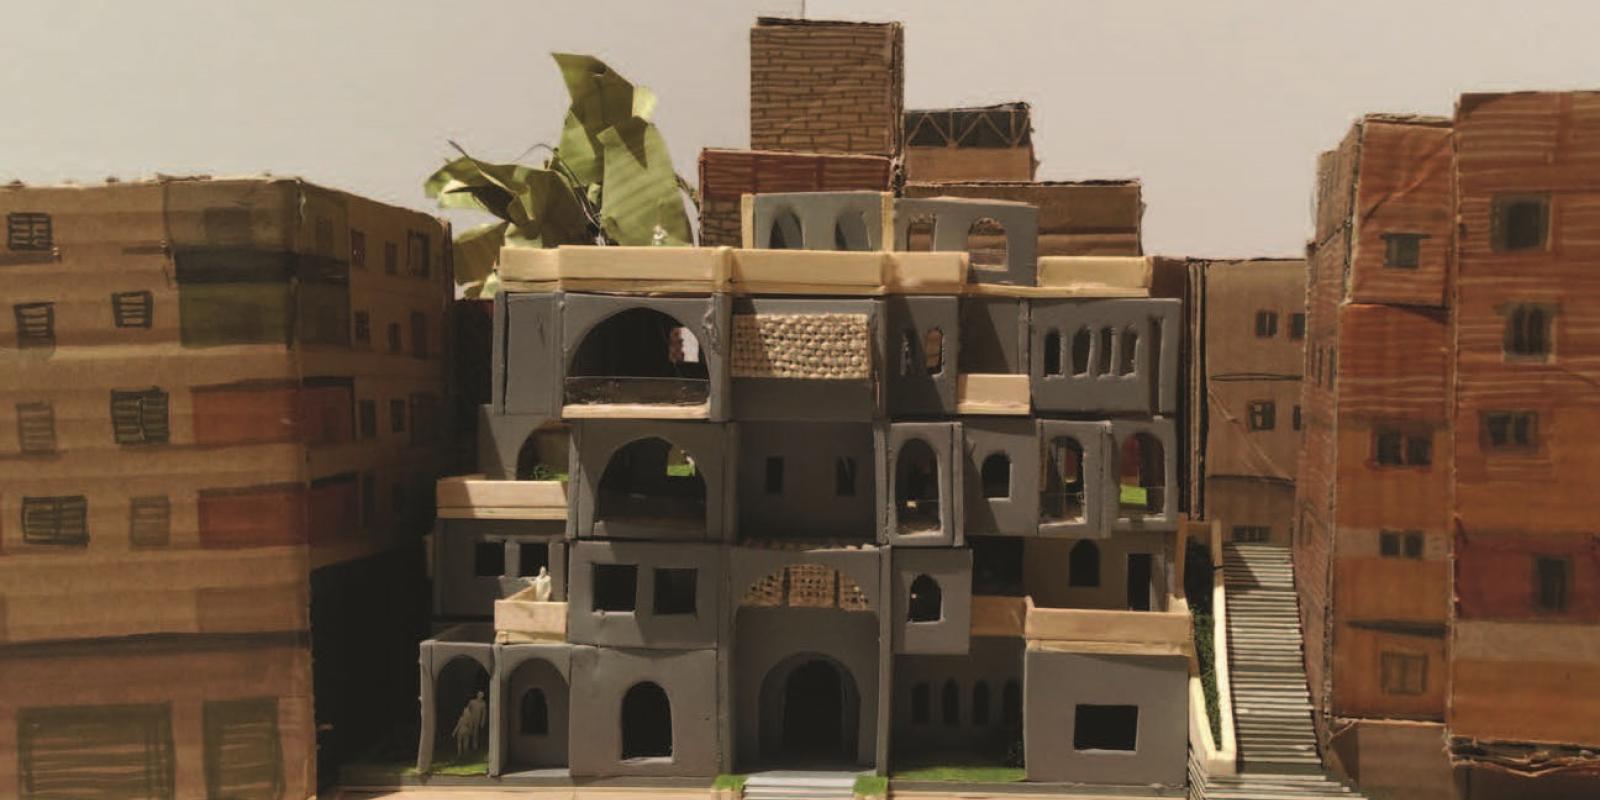 AUC student Maria Medhat created an architectural model for the Made in Egypt project.